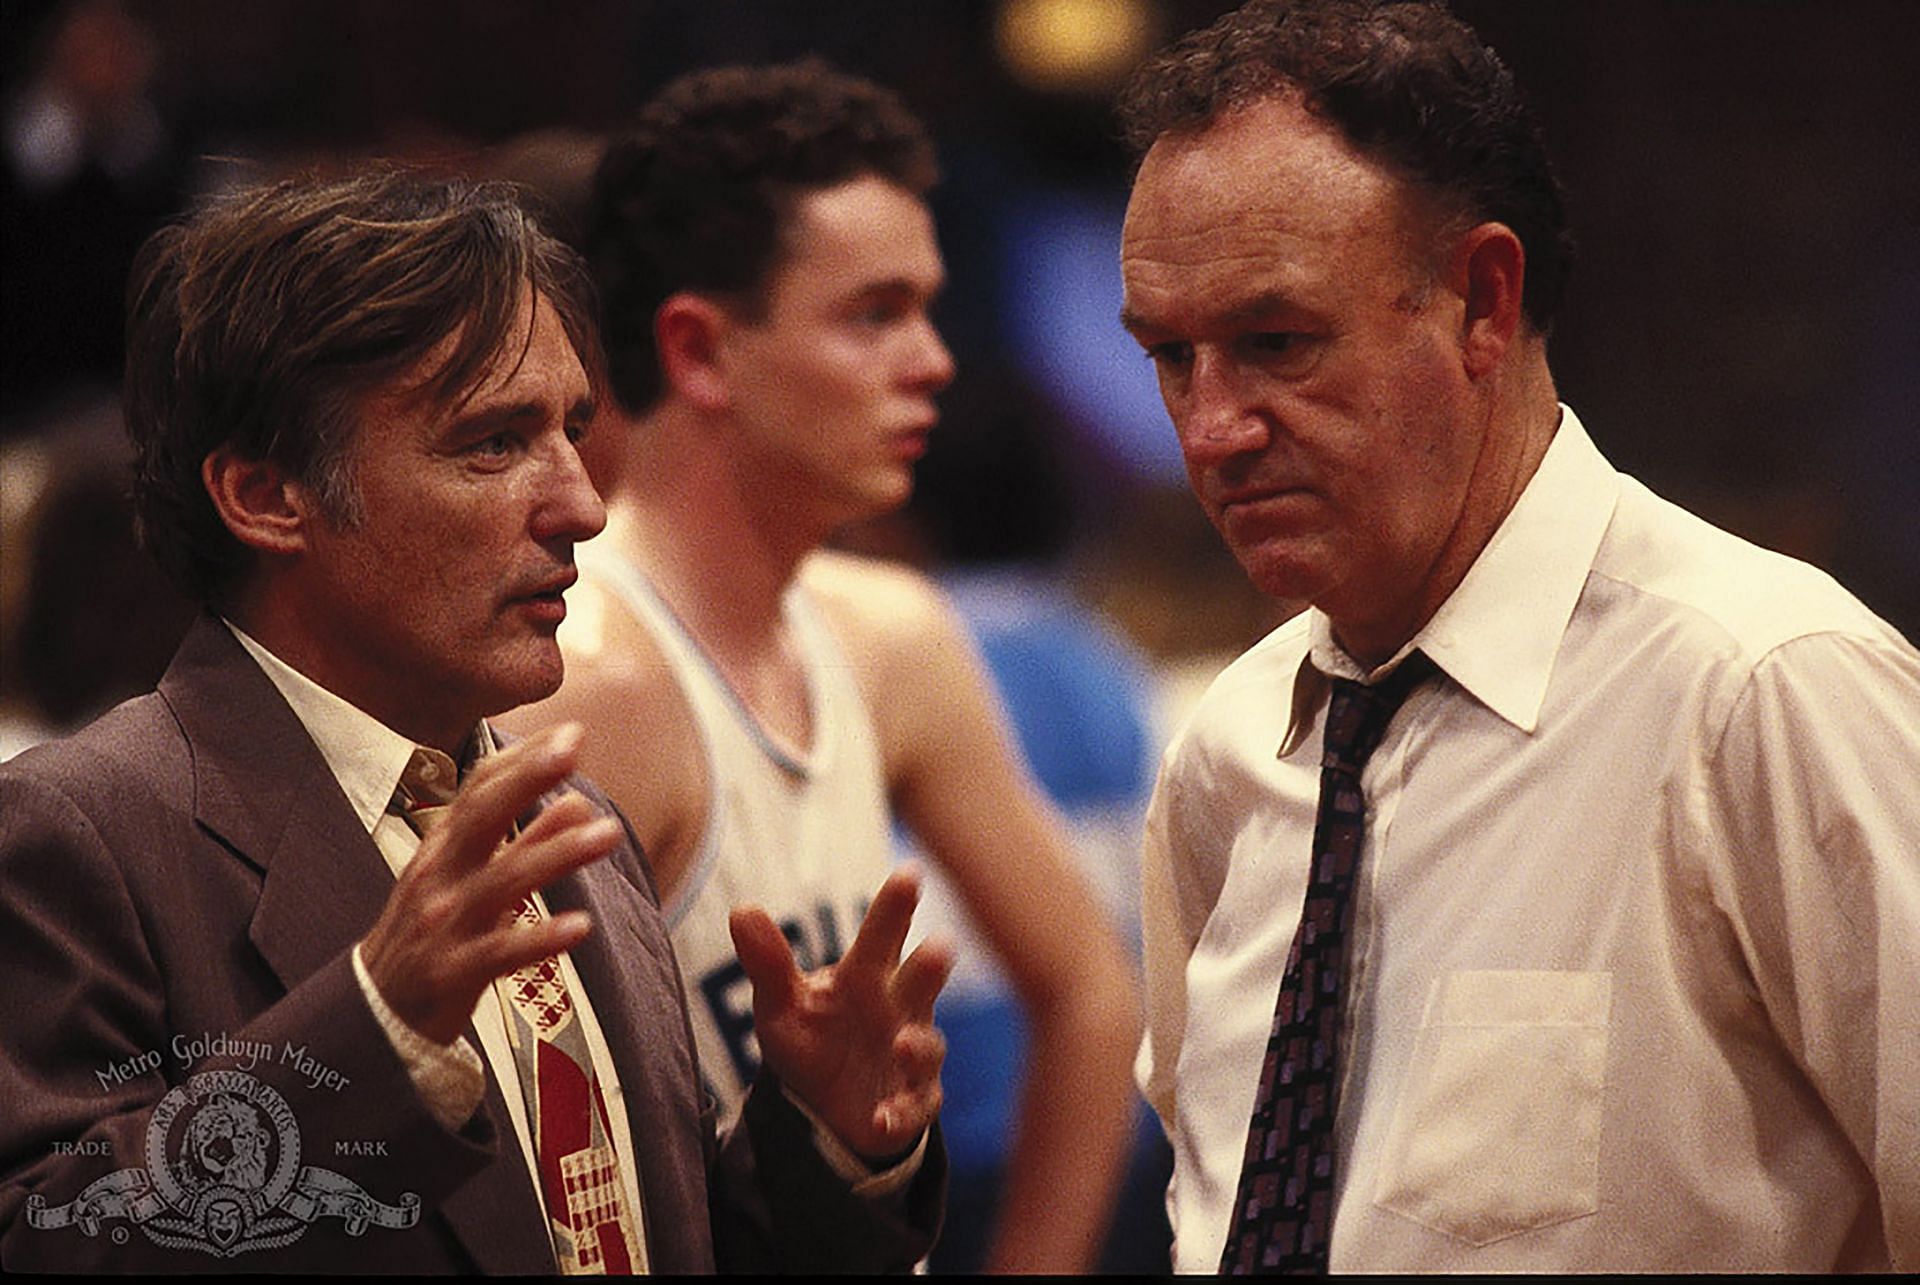 Norman Dale with his assisstant coach, Wilbur Flatch (Image via Metro Goldwyn Mayer)